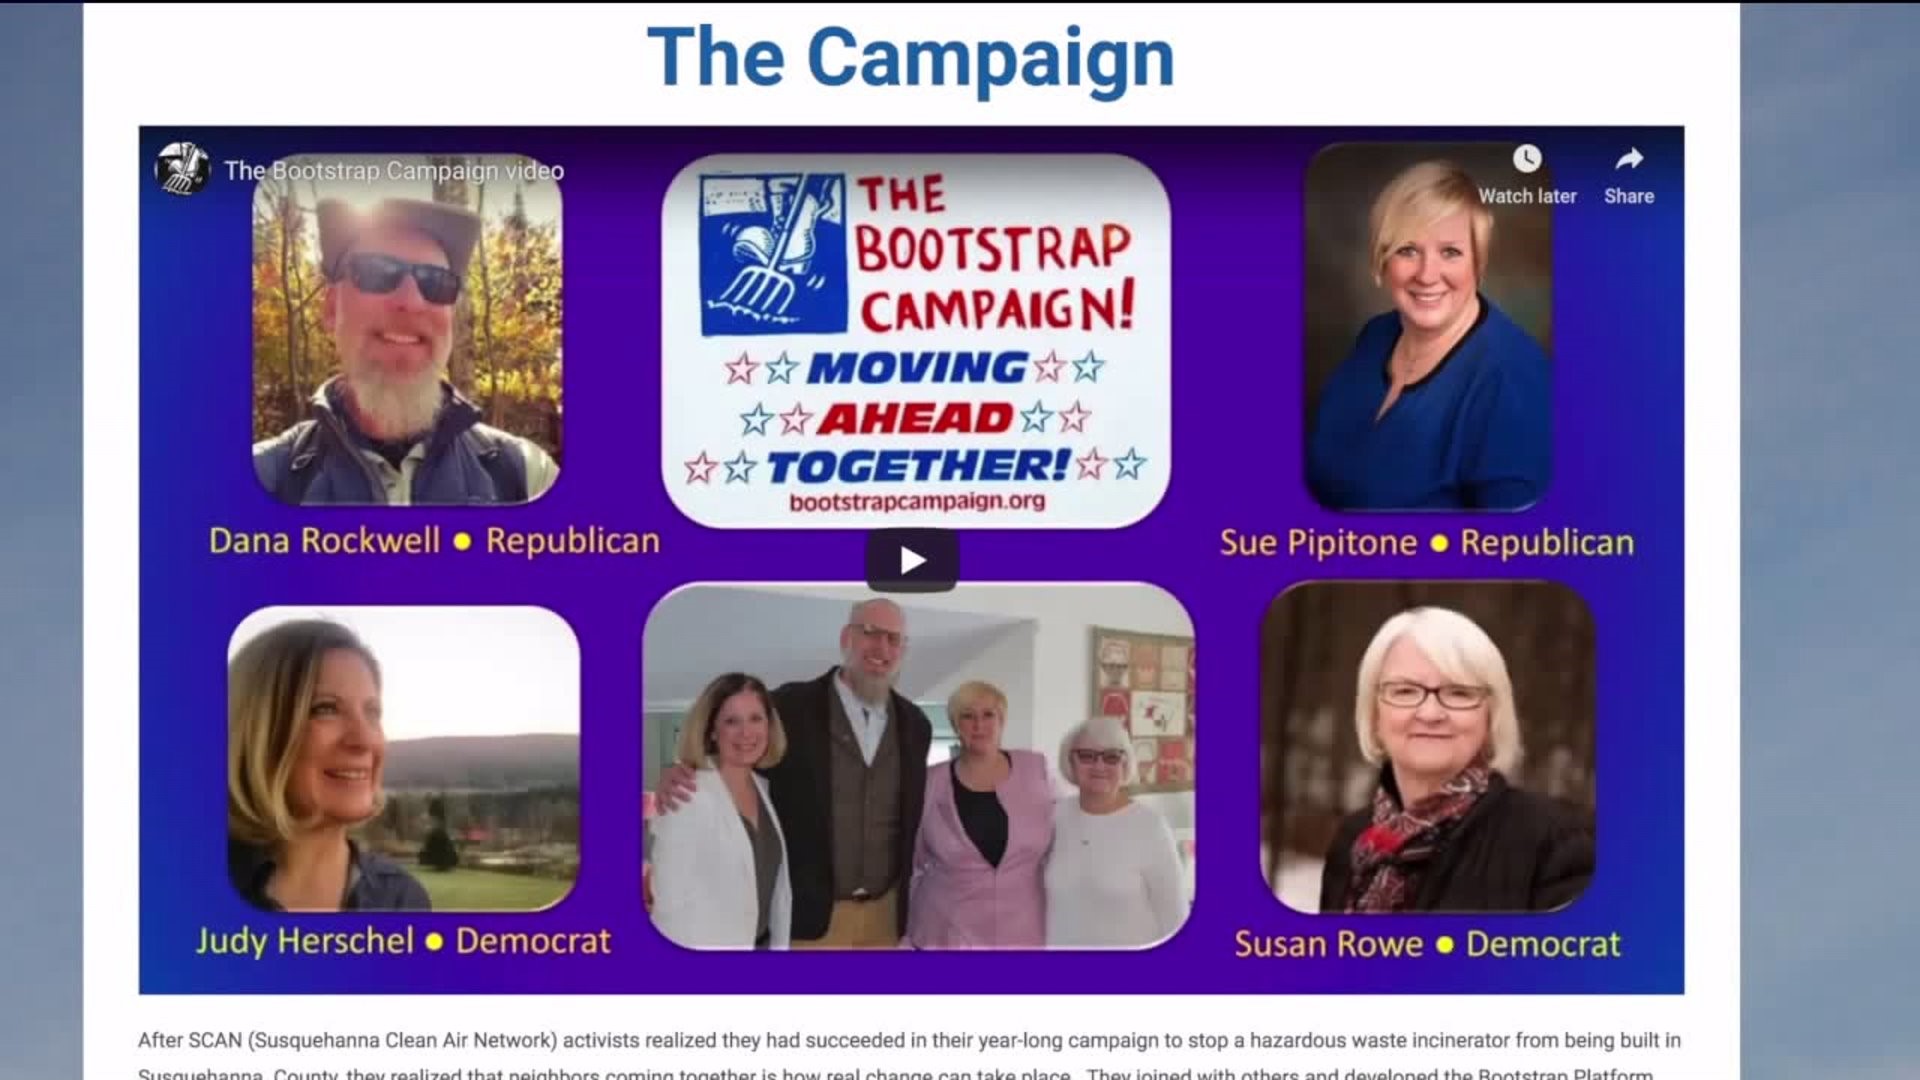 Susquehanna County Judge Rules in Favor of Bootstrap Campaign